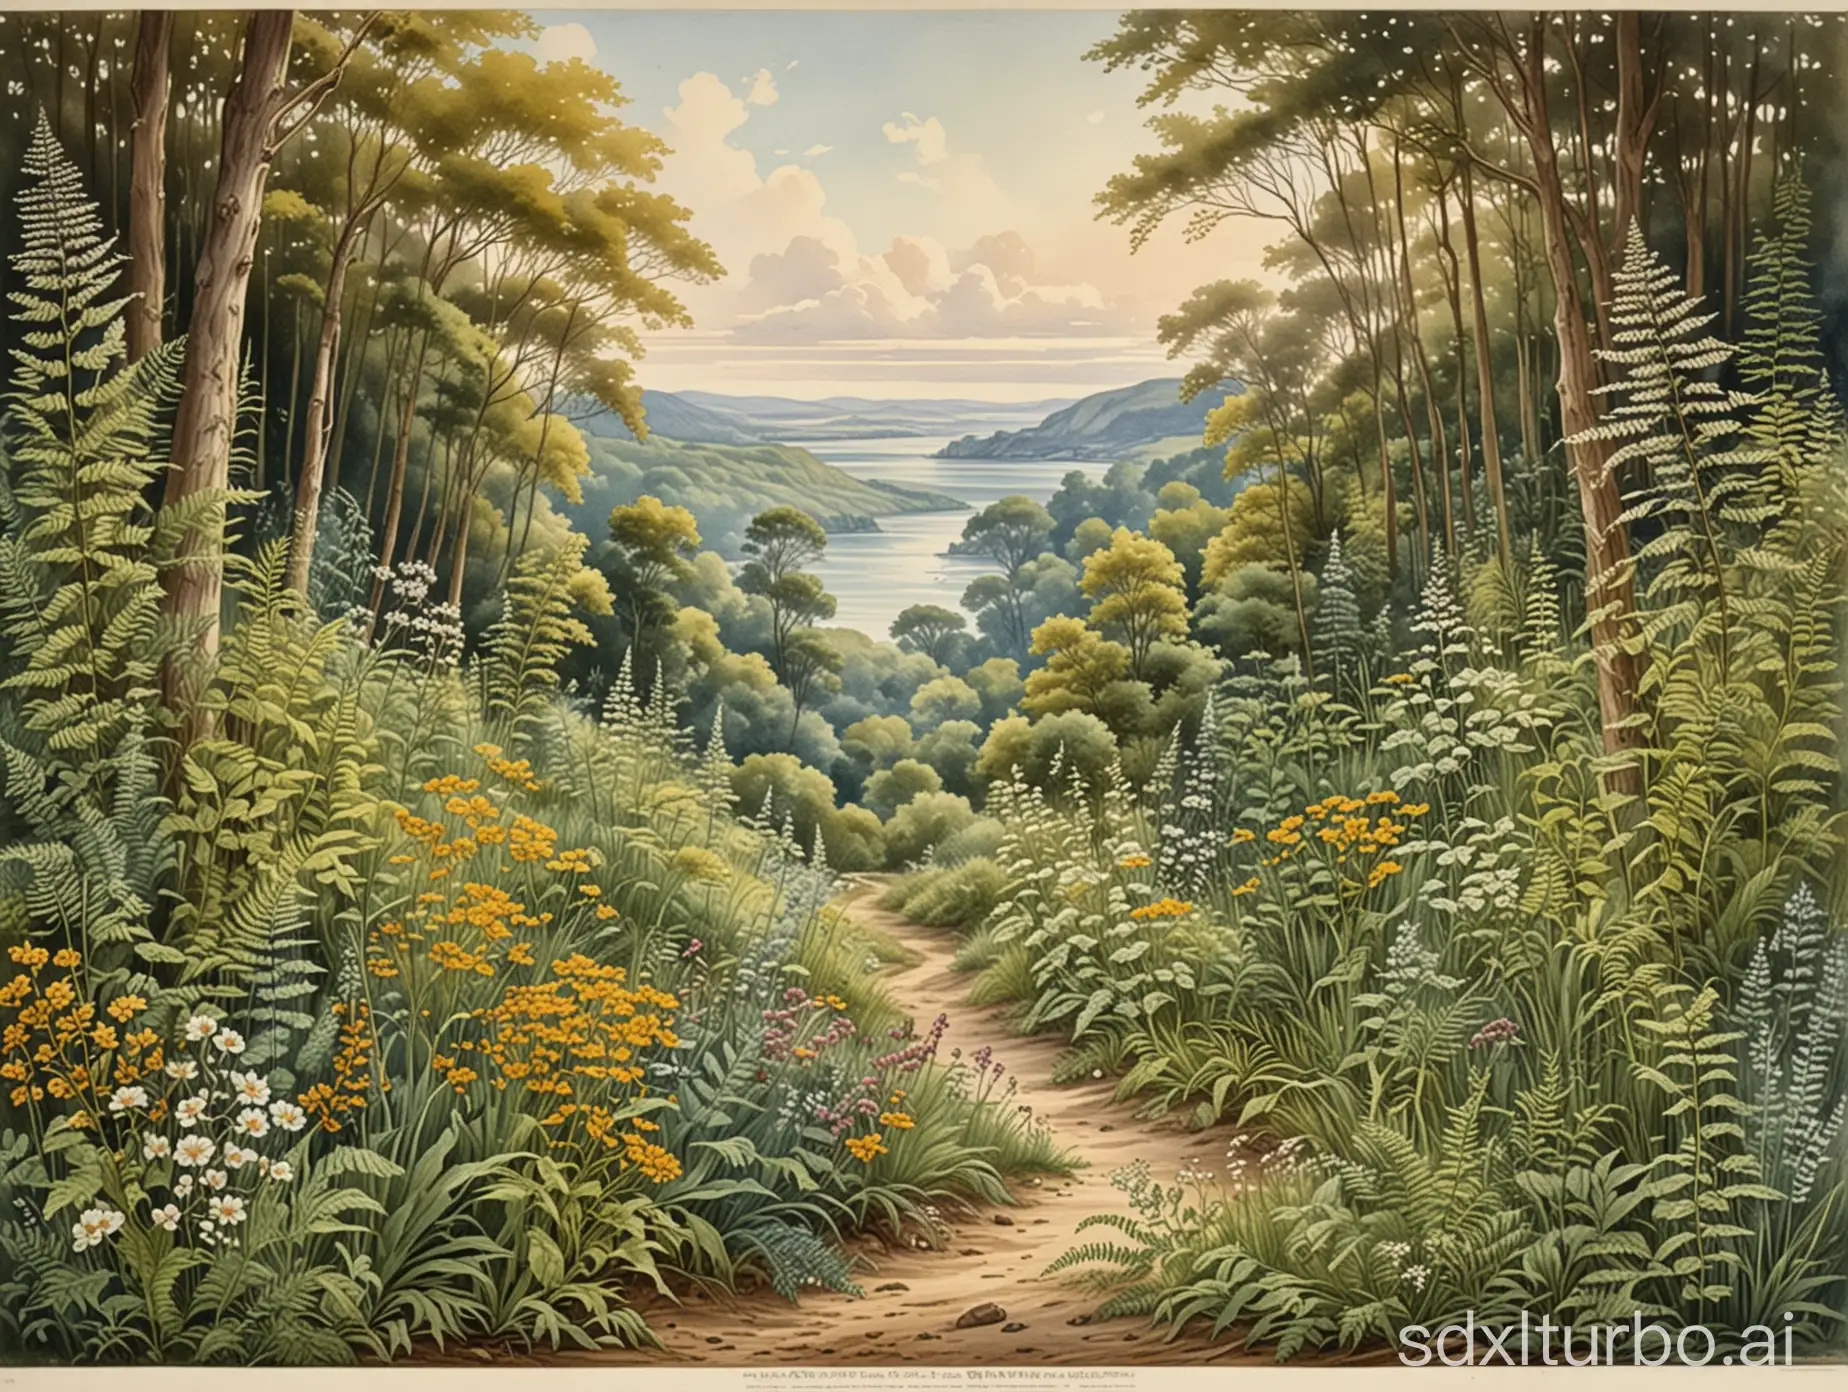 Fin de siècle Art Nouveau landscape with wildflowers, fern and trees, delicate detailed drawing and elaborate watercolor painting